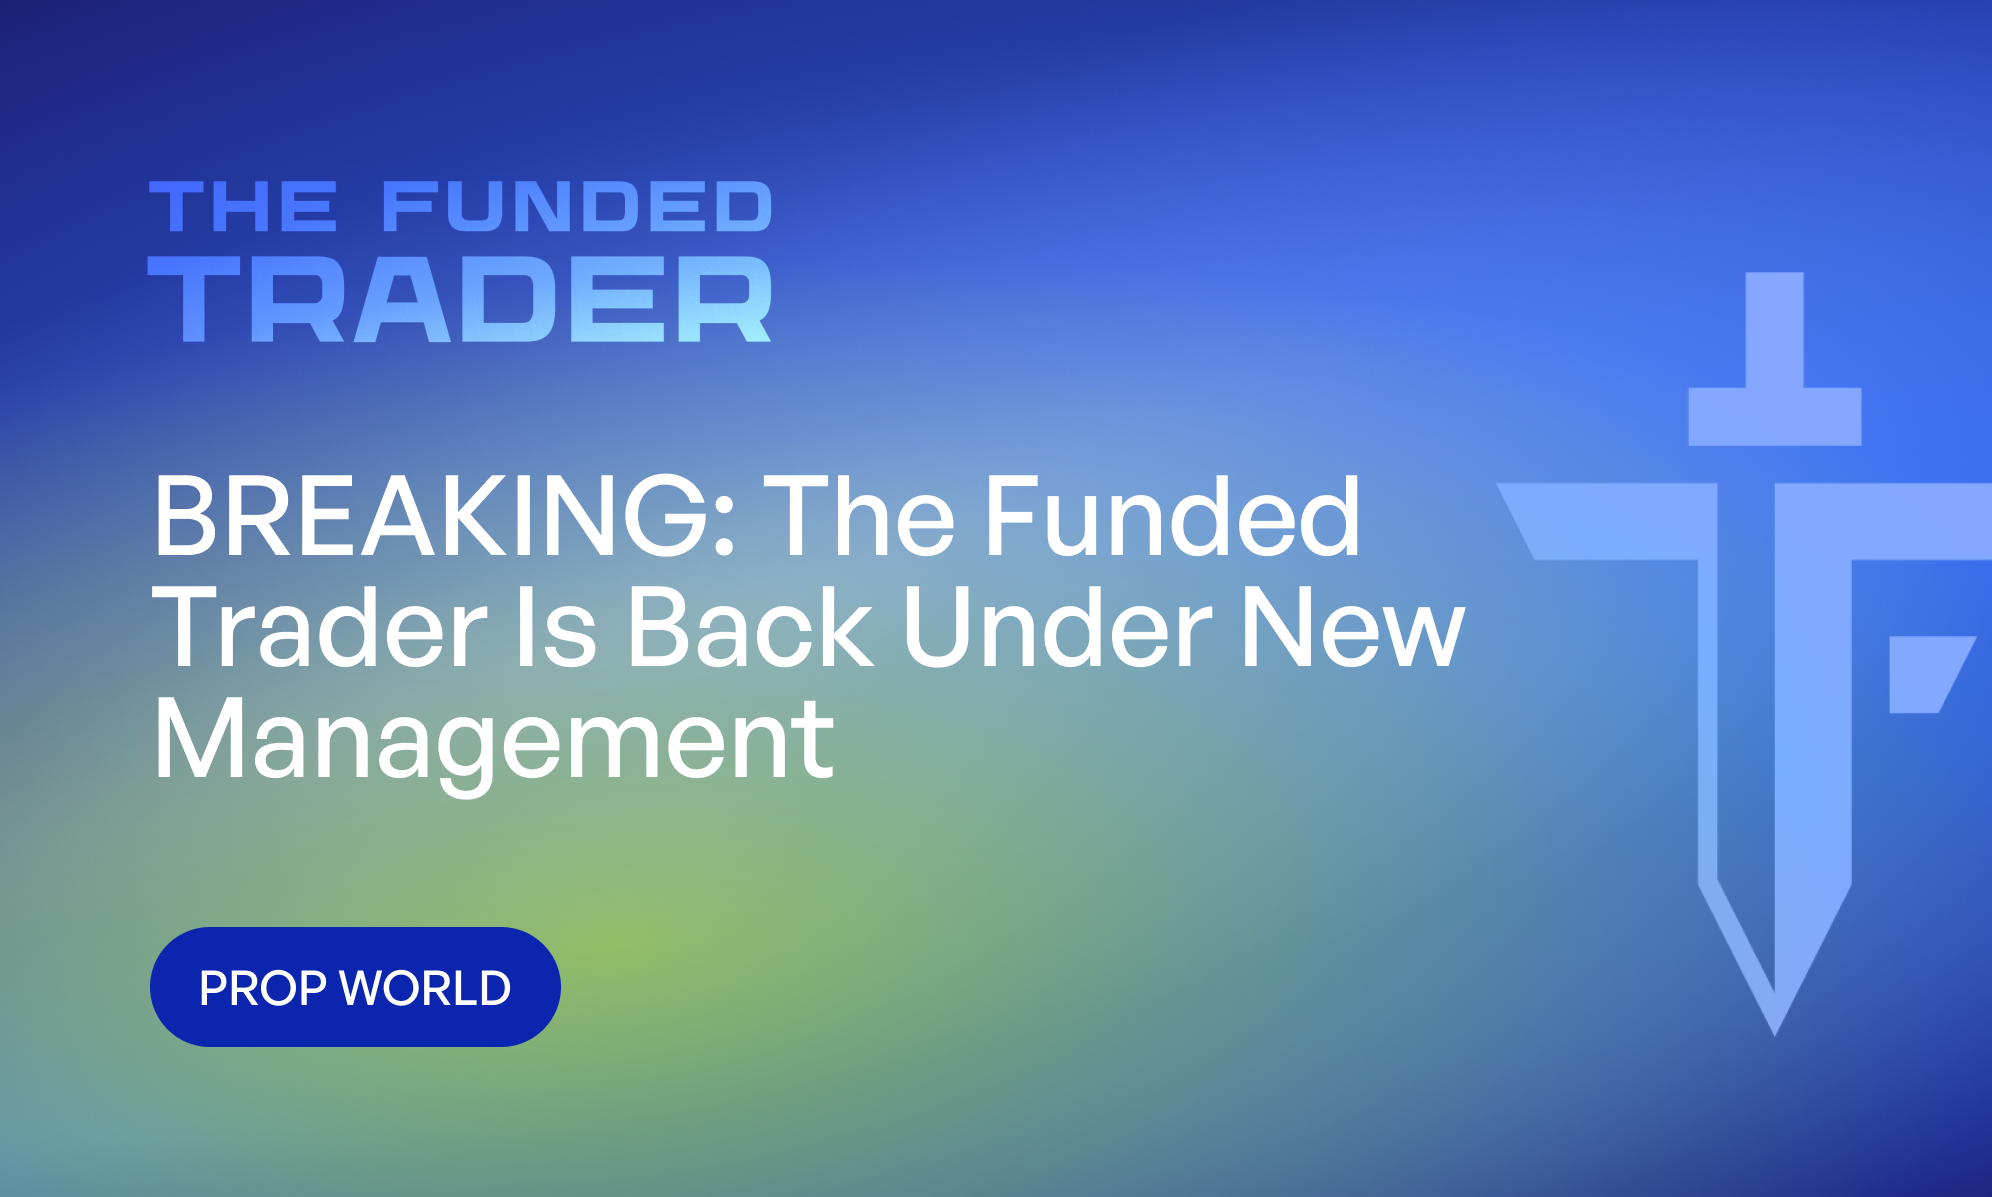 BREAKING: The Funded Trader Is Back Under New Management